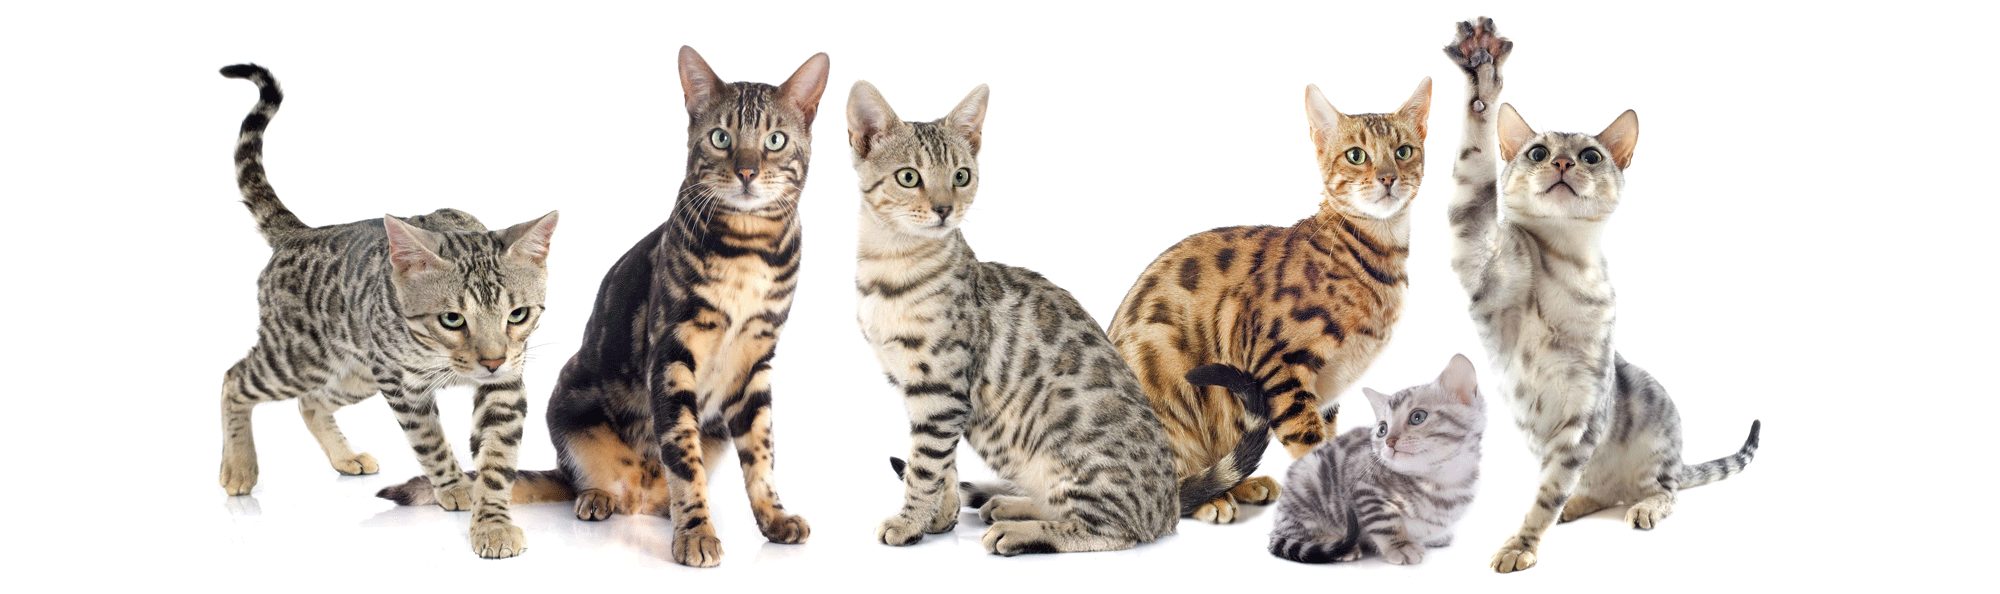 Bengal Cat Colors And Patterns Guide 6646